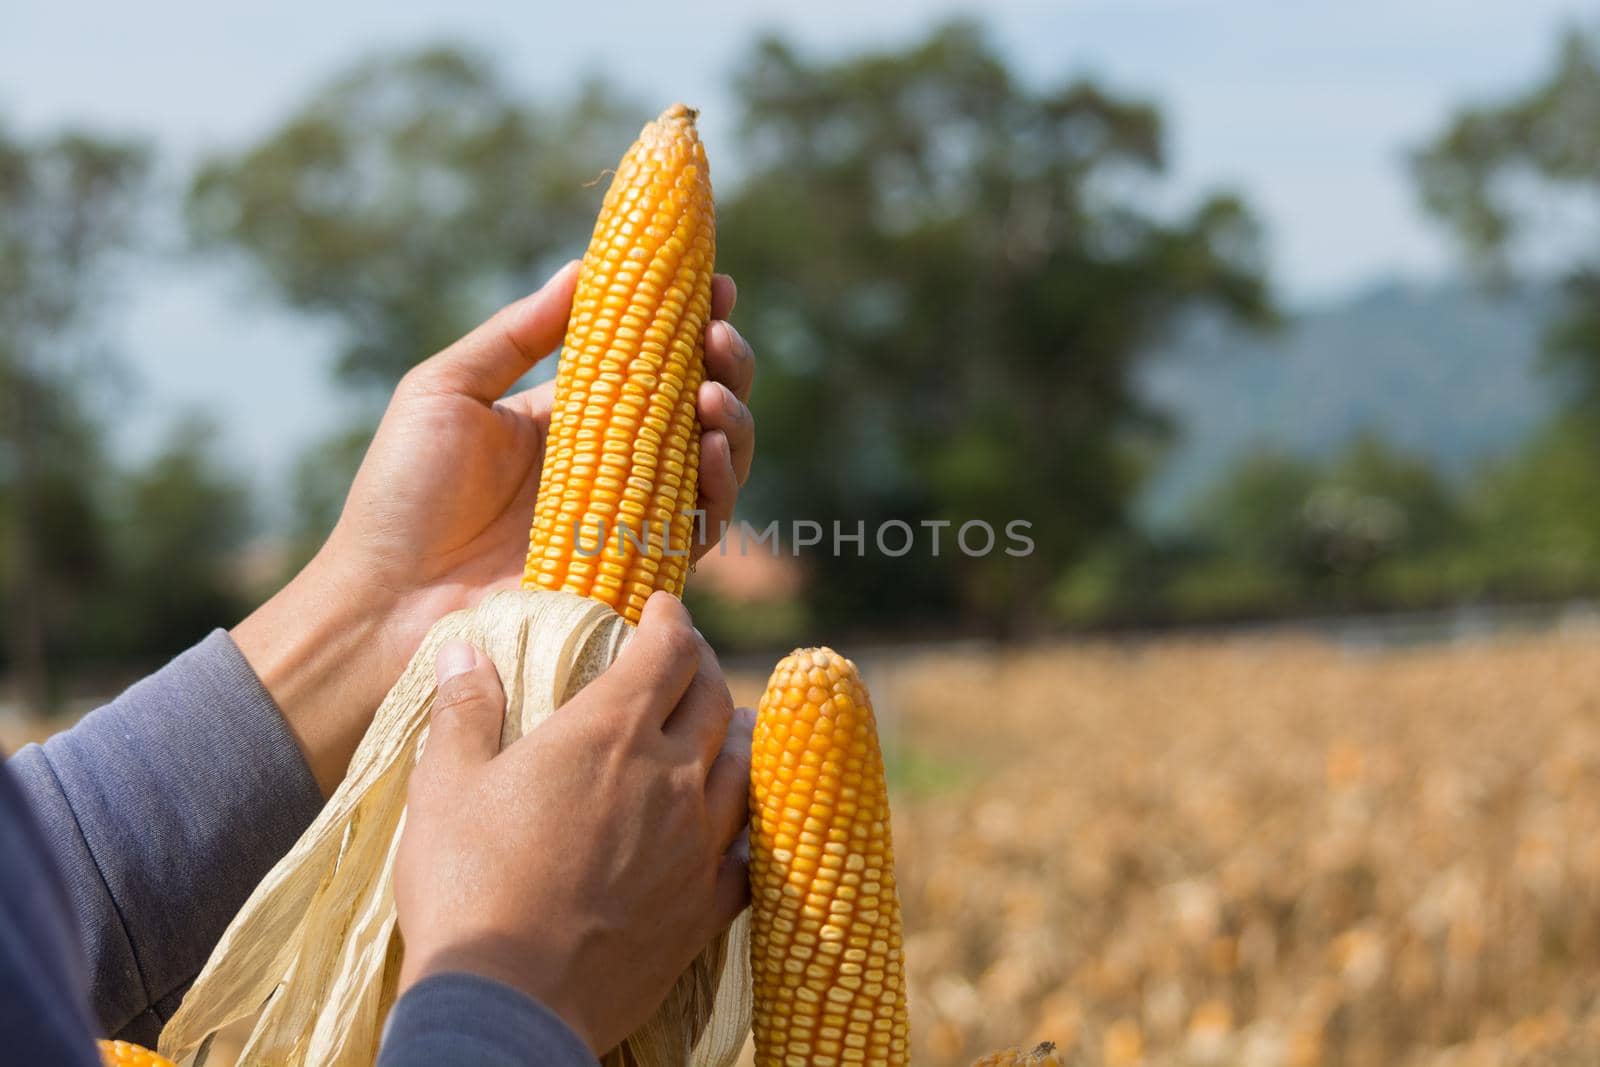 Closeup Ripe feed Corn Cob Hold in Hand of Farmer or Cultivator in Dry Corn Field as agro-industry and agricultural produce Concept